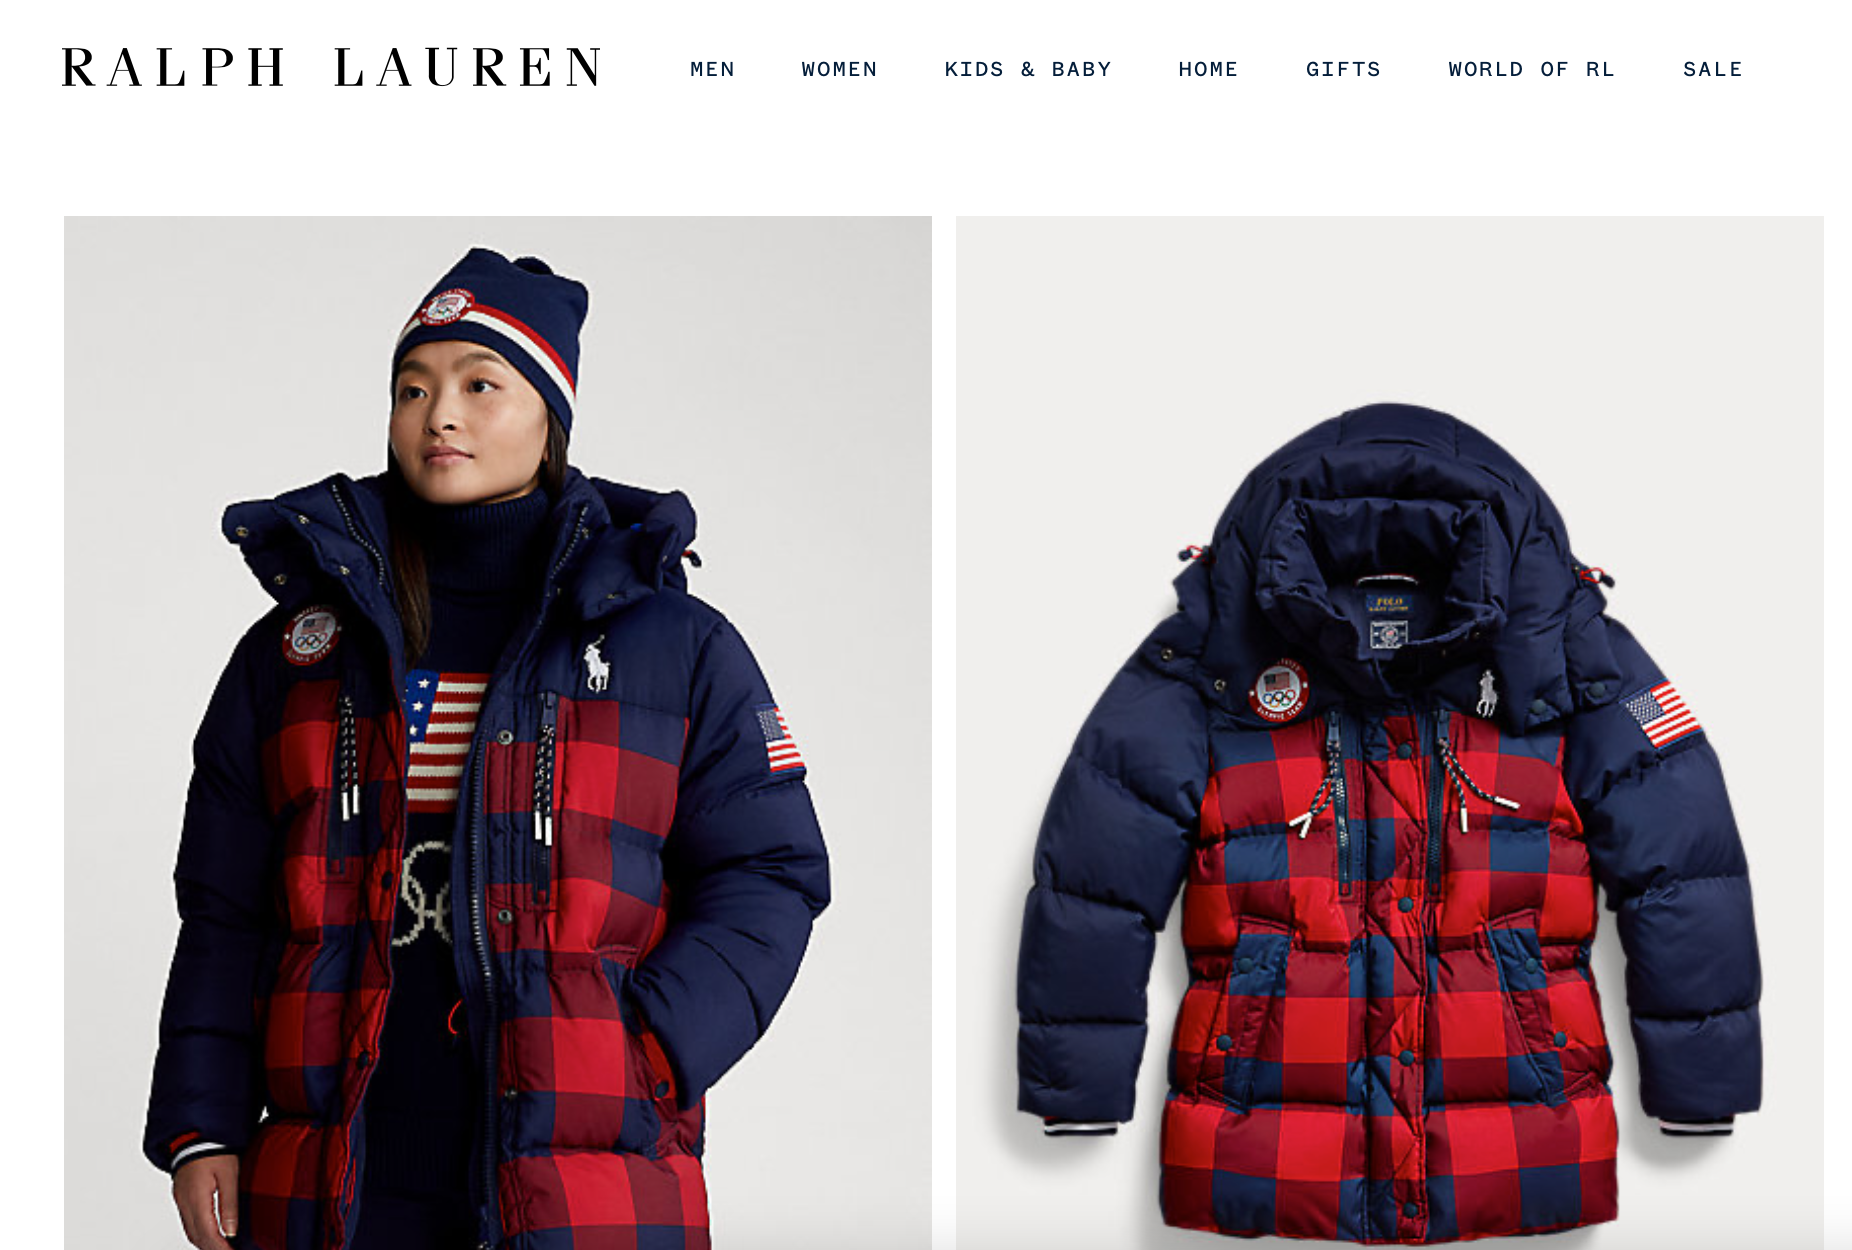 Ralph Lauren unveils Team USA outfits for Beijing Winter Olympics after calls for designer be replaced | The Independent